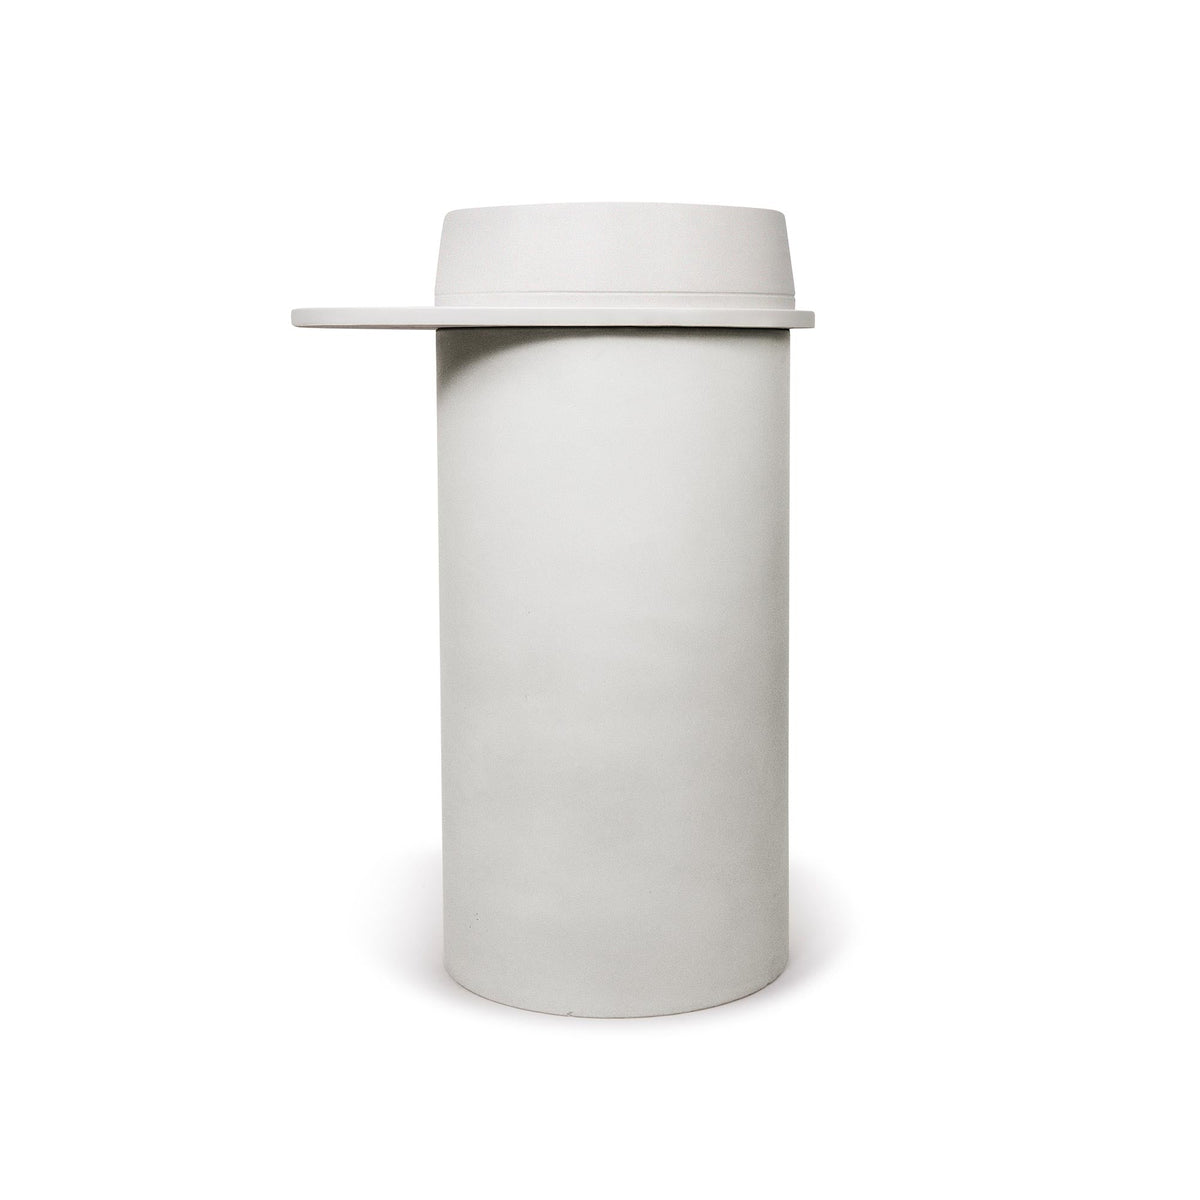 Cylinder with Tray - Funl Basin (Musk,Musk)